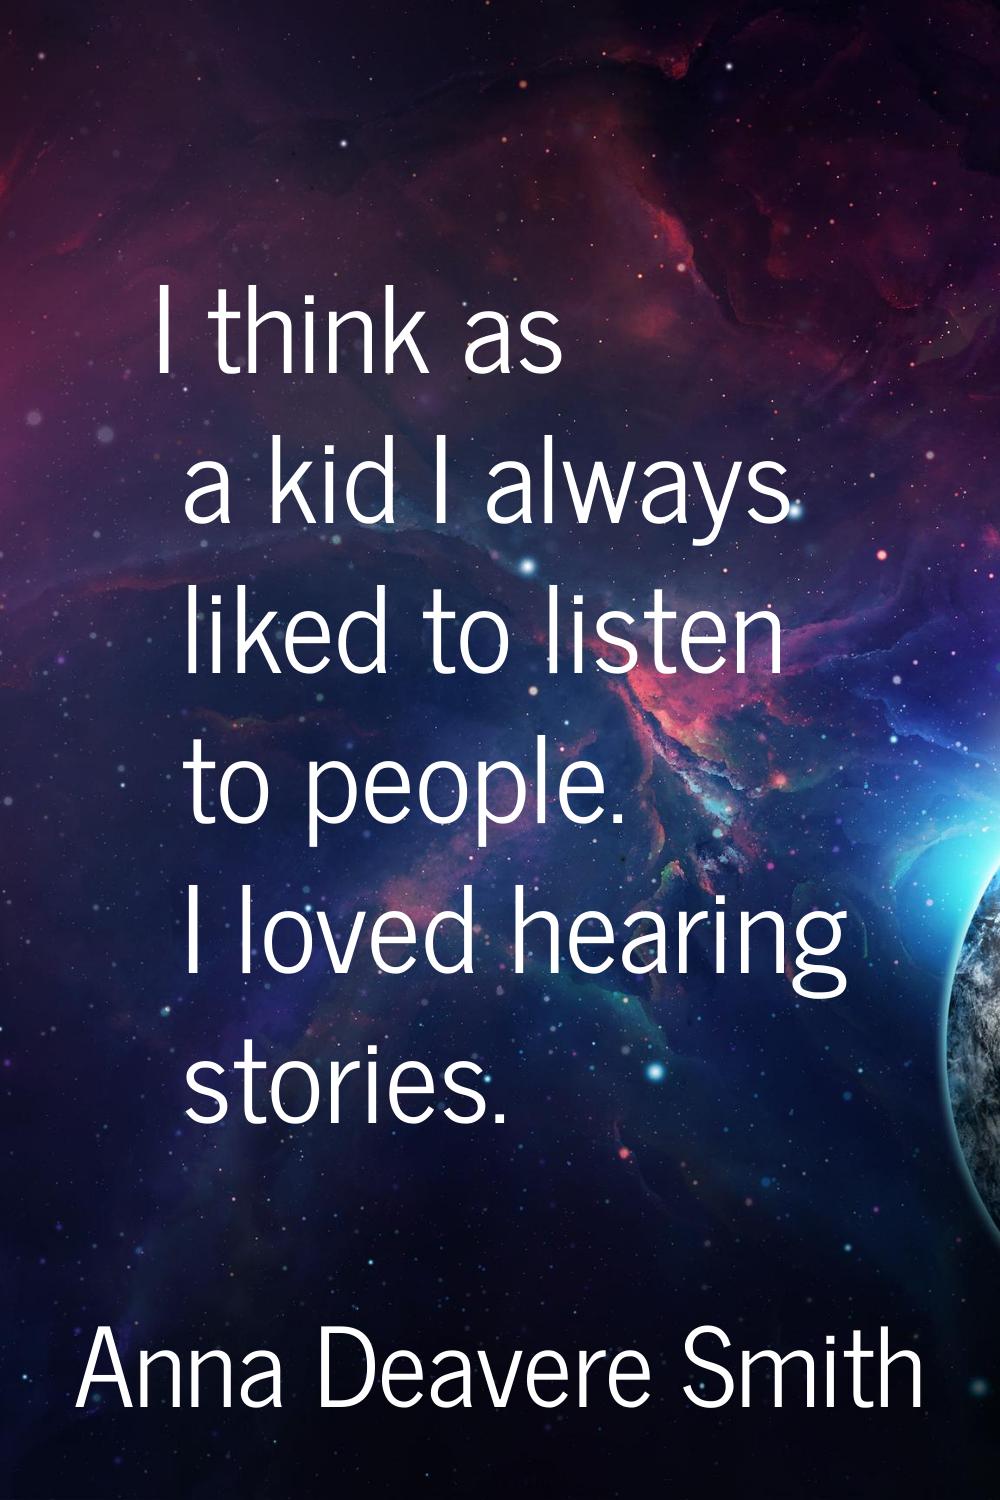 I think as a kid I always liked to listen to people. I loved hearing stories.